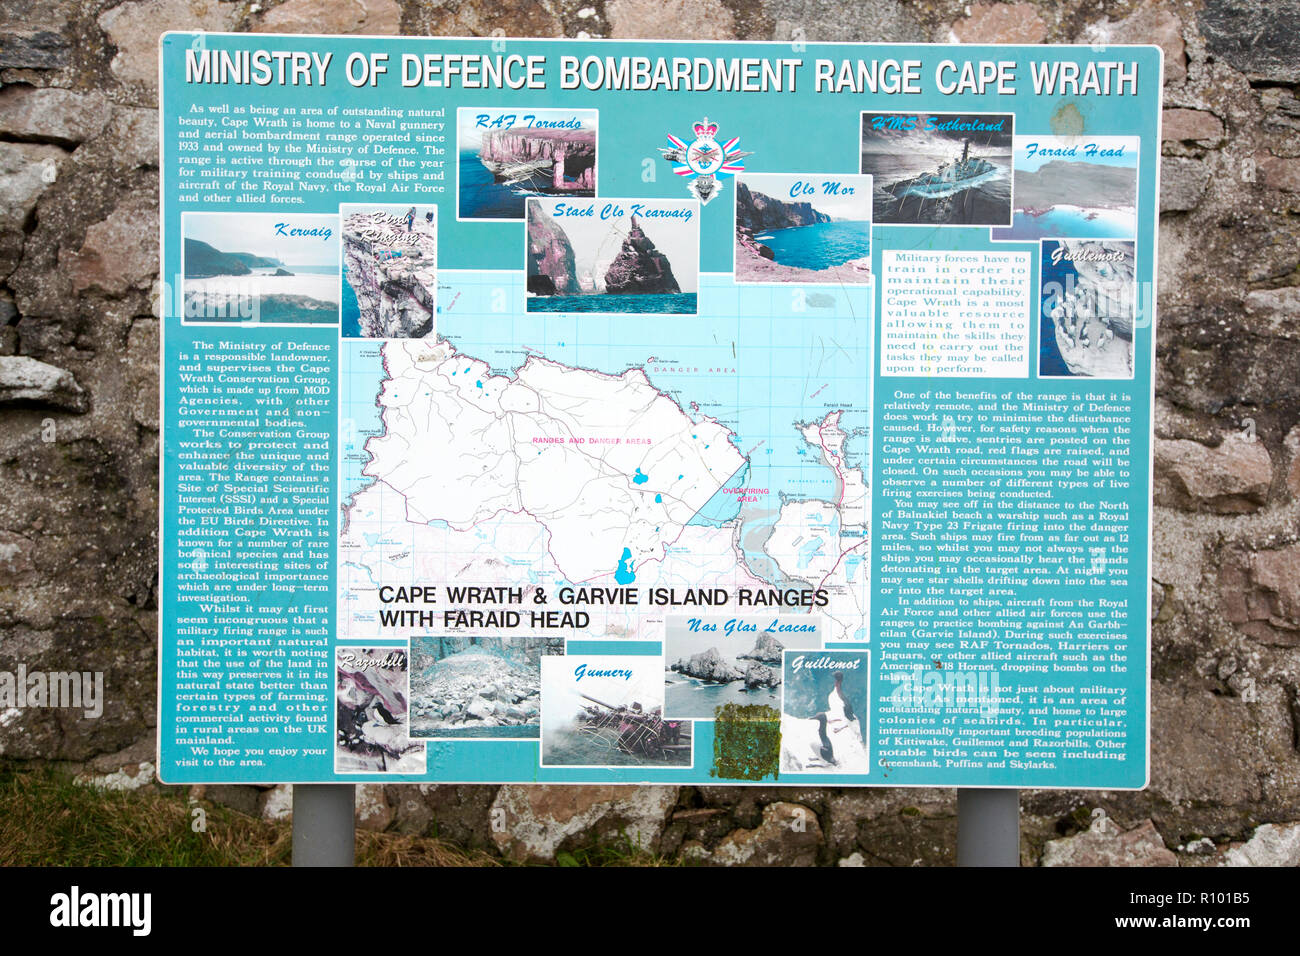 A sign about the Cape Wrath bombing range near Durness, Sutherland, UK. Stock Photo